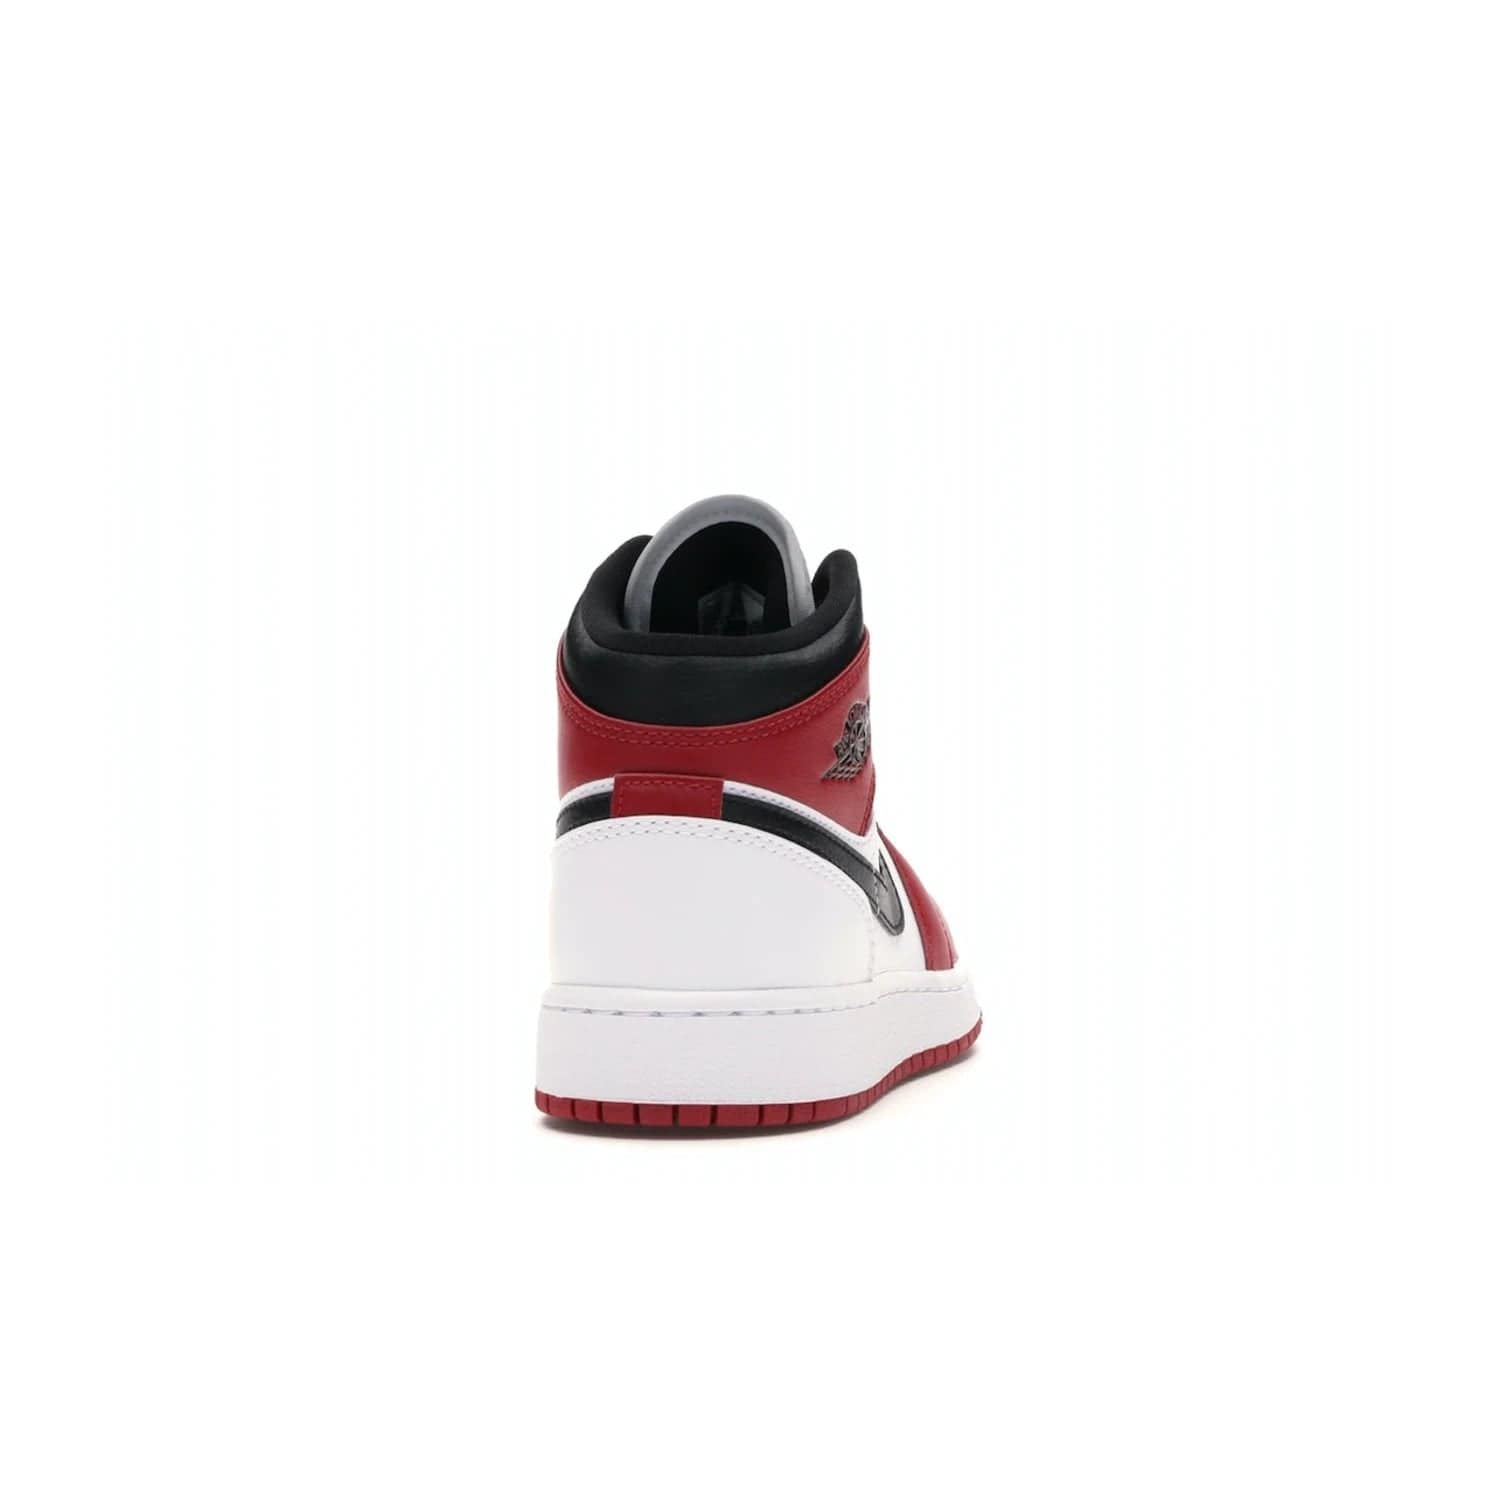 Jordan 1 Mid Chicago (2020) (GS) - Image 29 - Only at www.BallersClubKickz.com - The Kids Air Jordan 1 Mid Chicago 2020 is a stylish sneaker with classic Jordan features. White, red and black color scheme with iconic Wings and Swoosh logos, padded ankle support, white midsole with Air tech and black cotton laces. Sure to become an instant classic. July 2020 release.